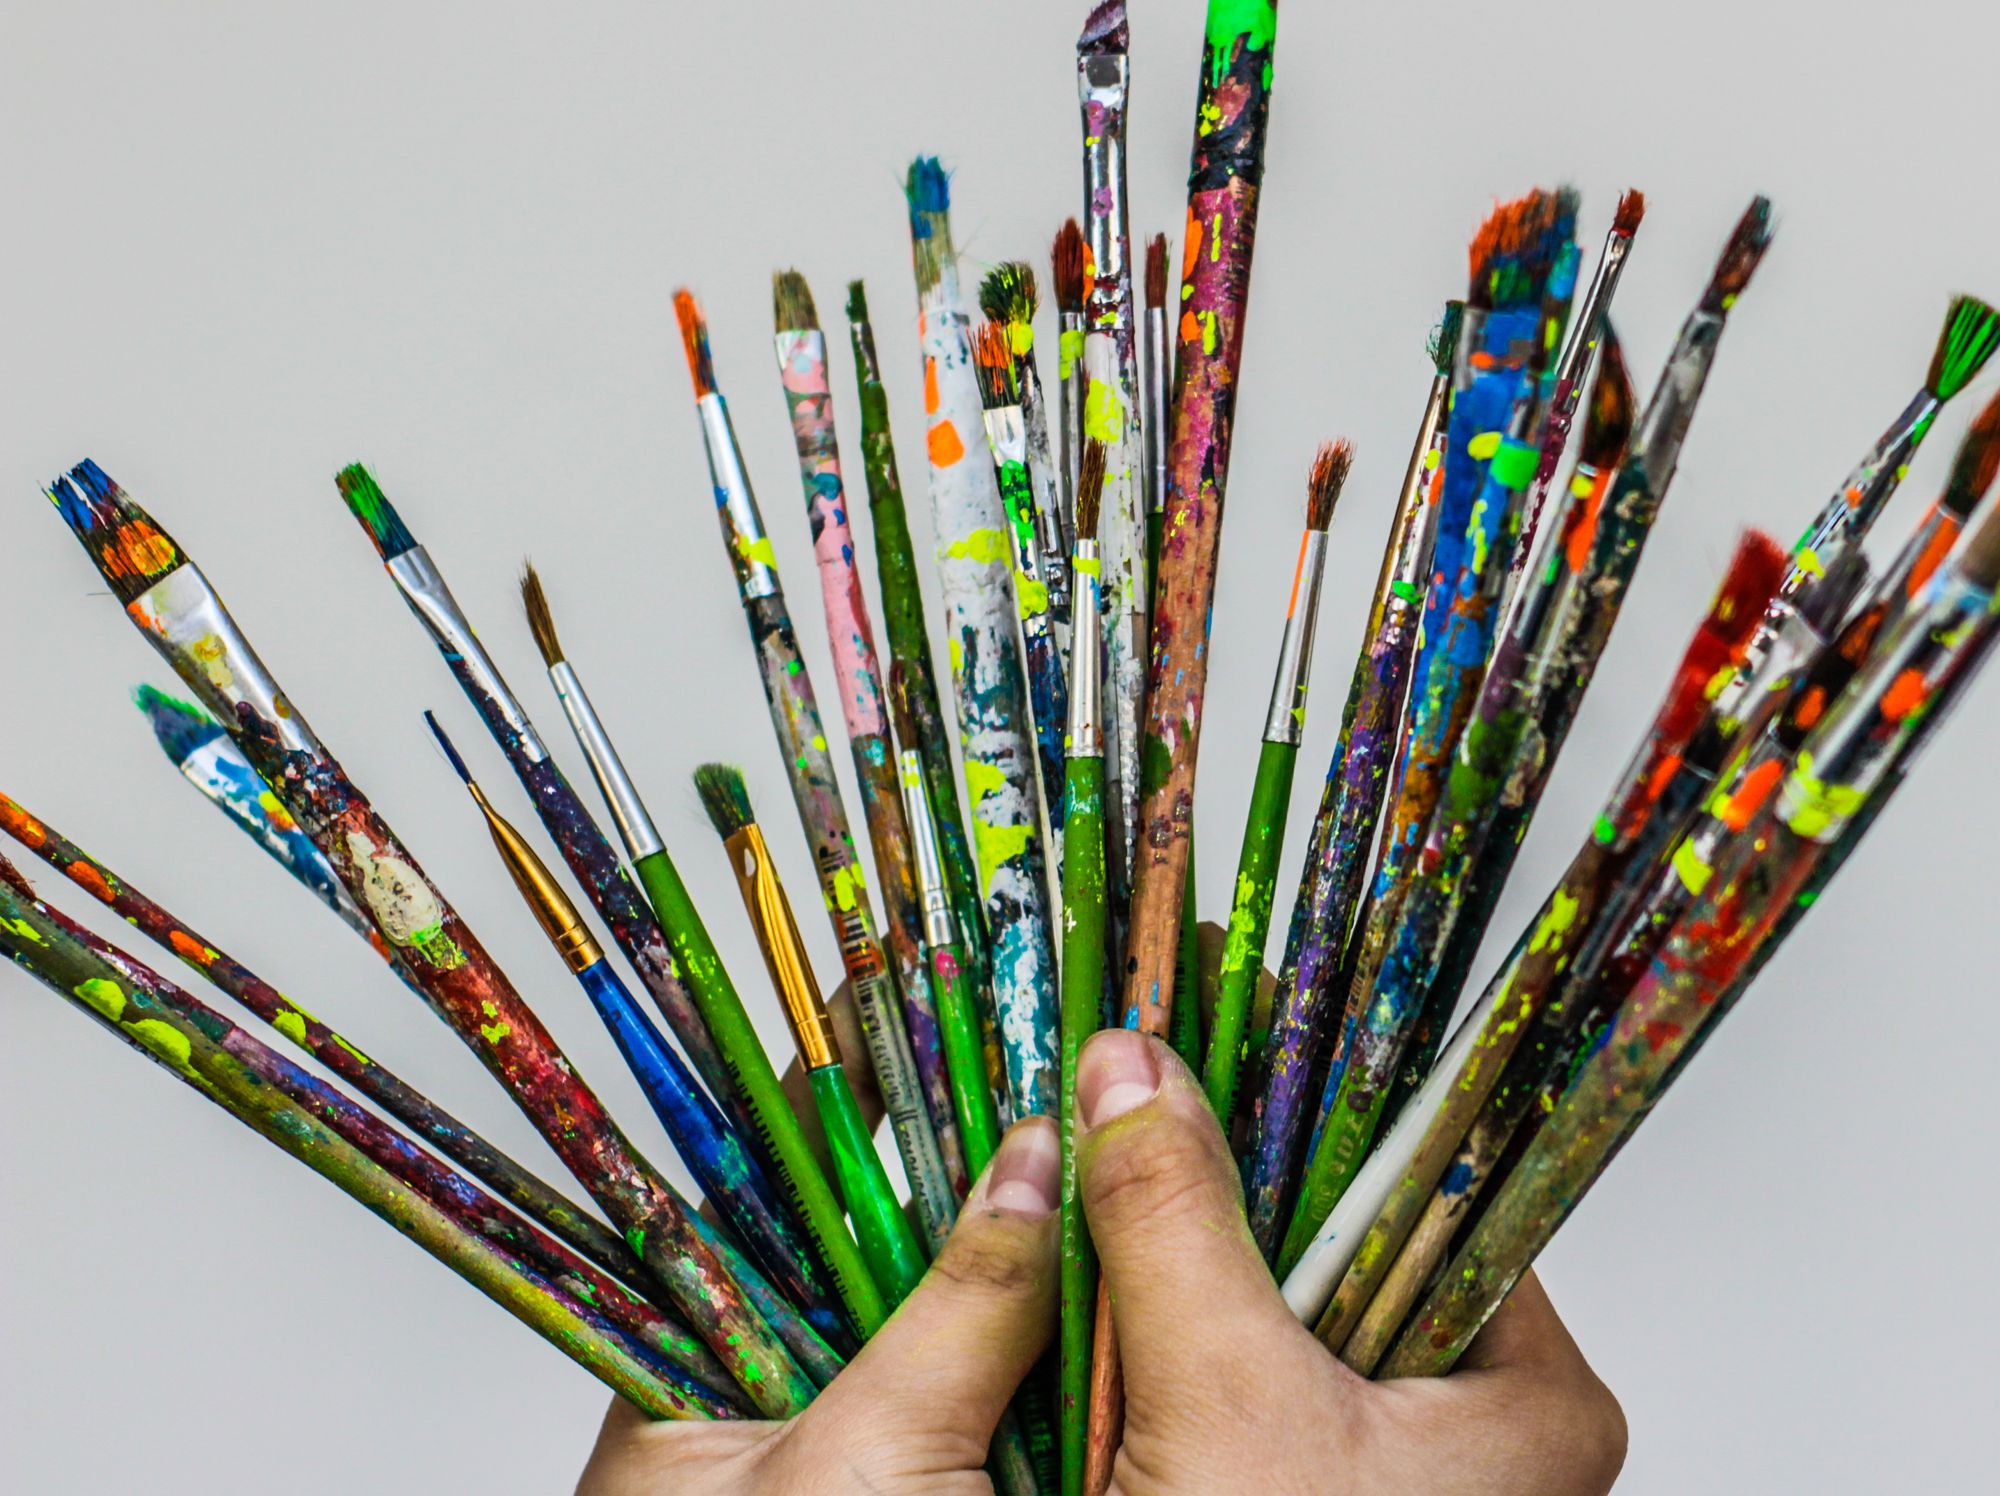 An image of a person holding a lot of used paintbrushes in their hands.